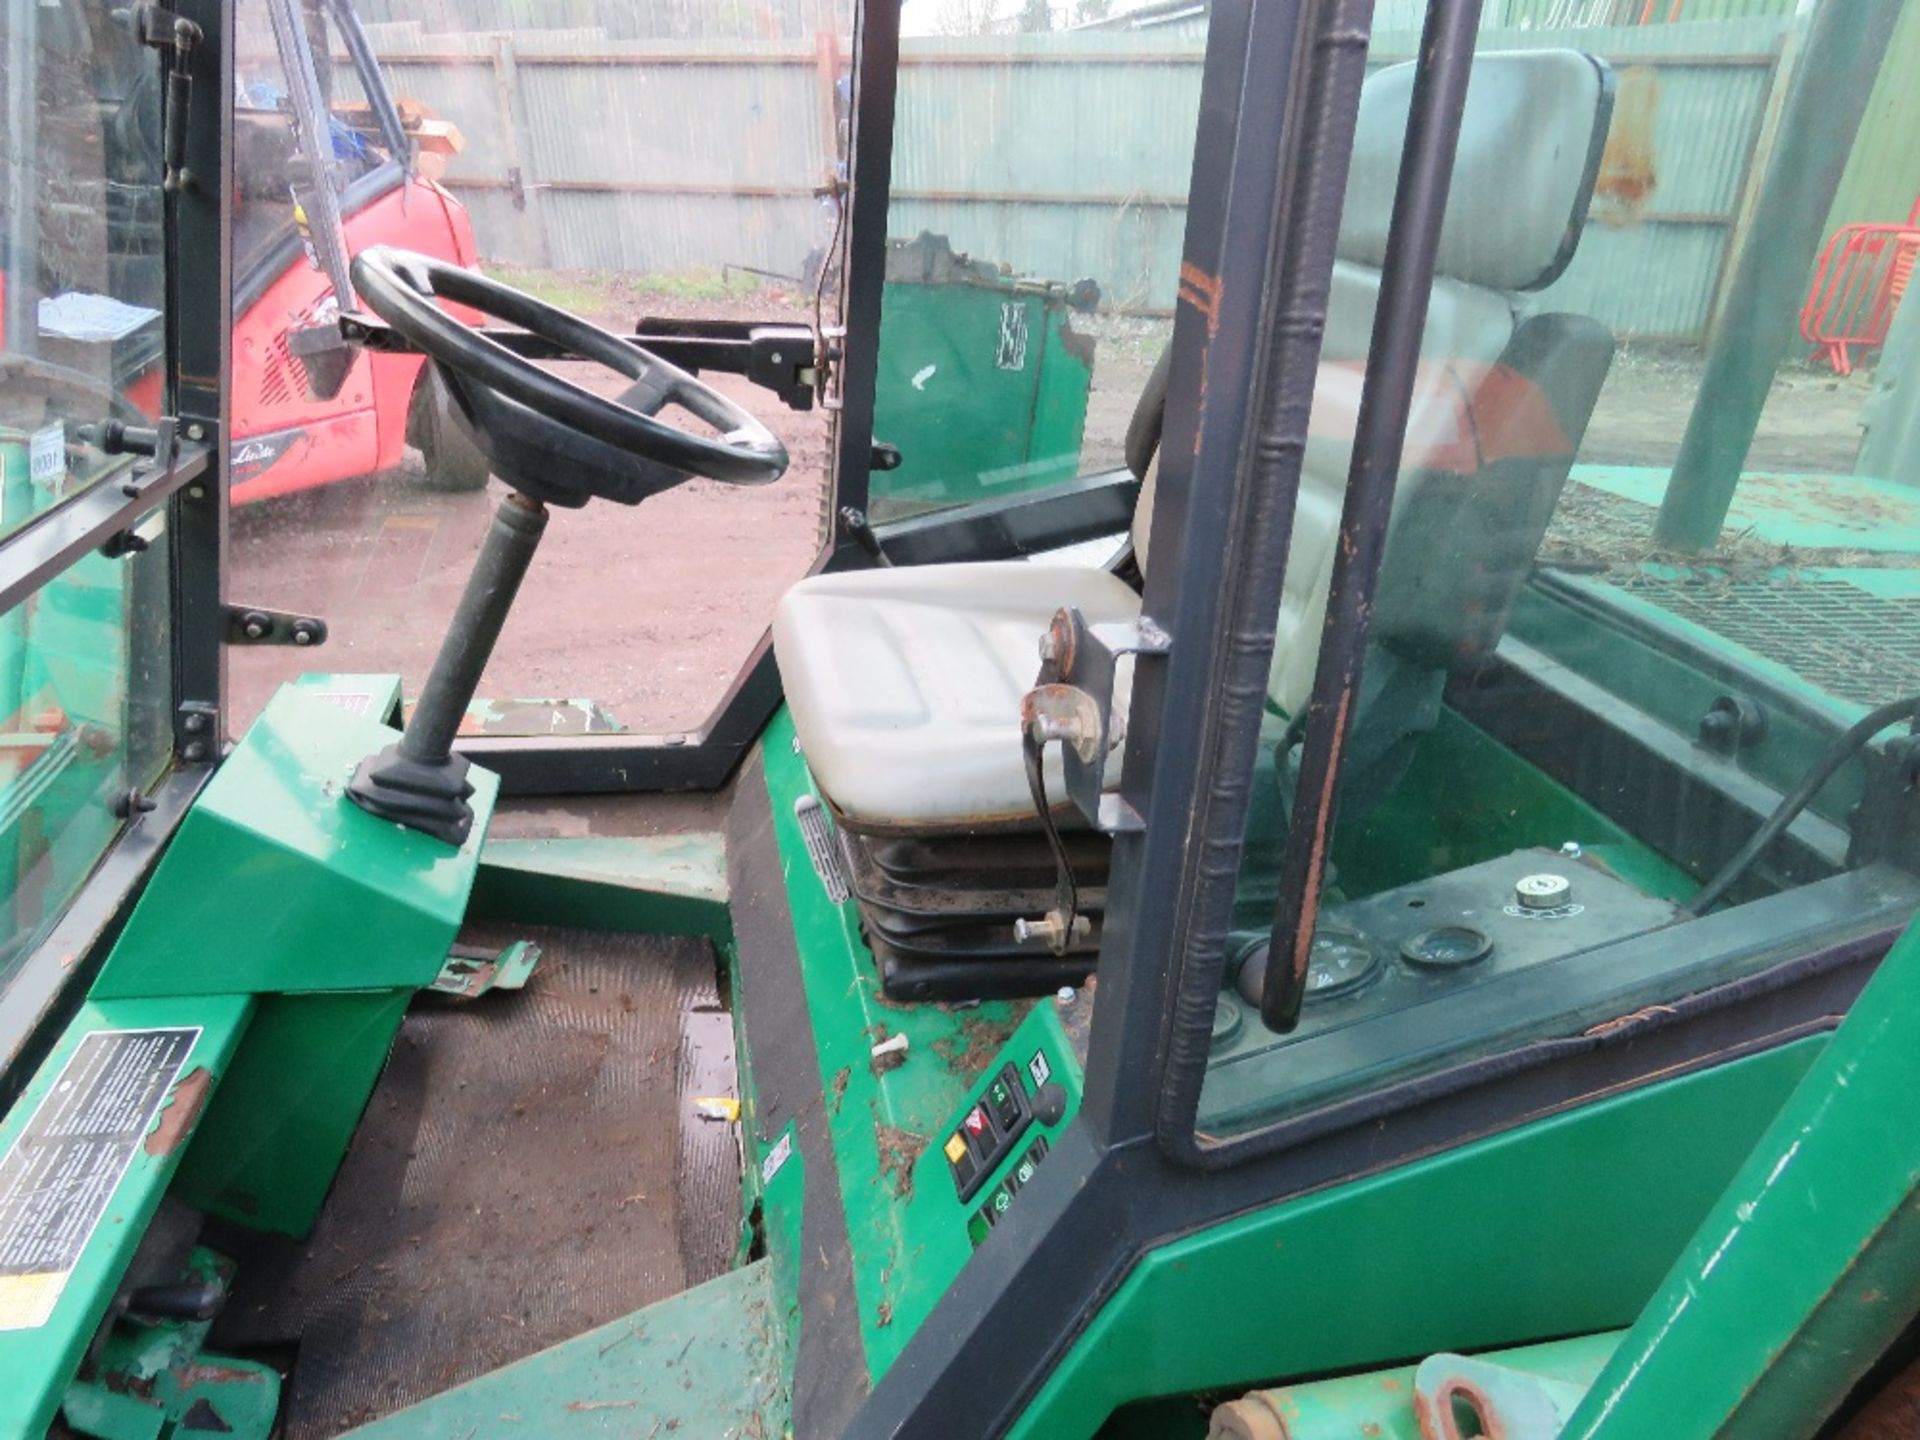 RANSOMES COMMANDER 3500DX 5 GANG MOWER, 4WD, 3138 REC HOURS. KUBOTA ENGINE. WHEN TESTED WAS SEEN TO - Image 9 of 10